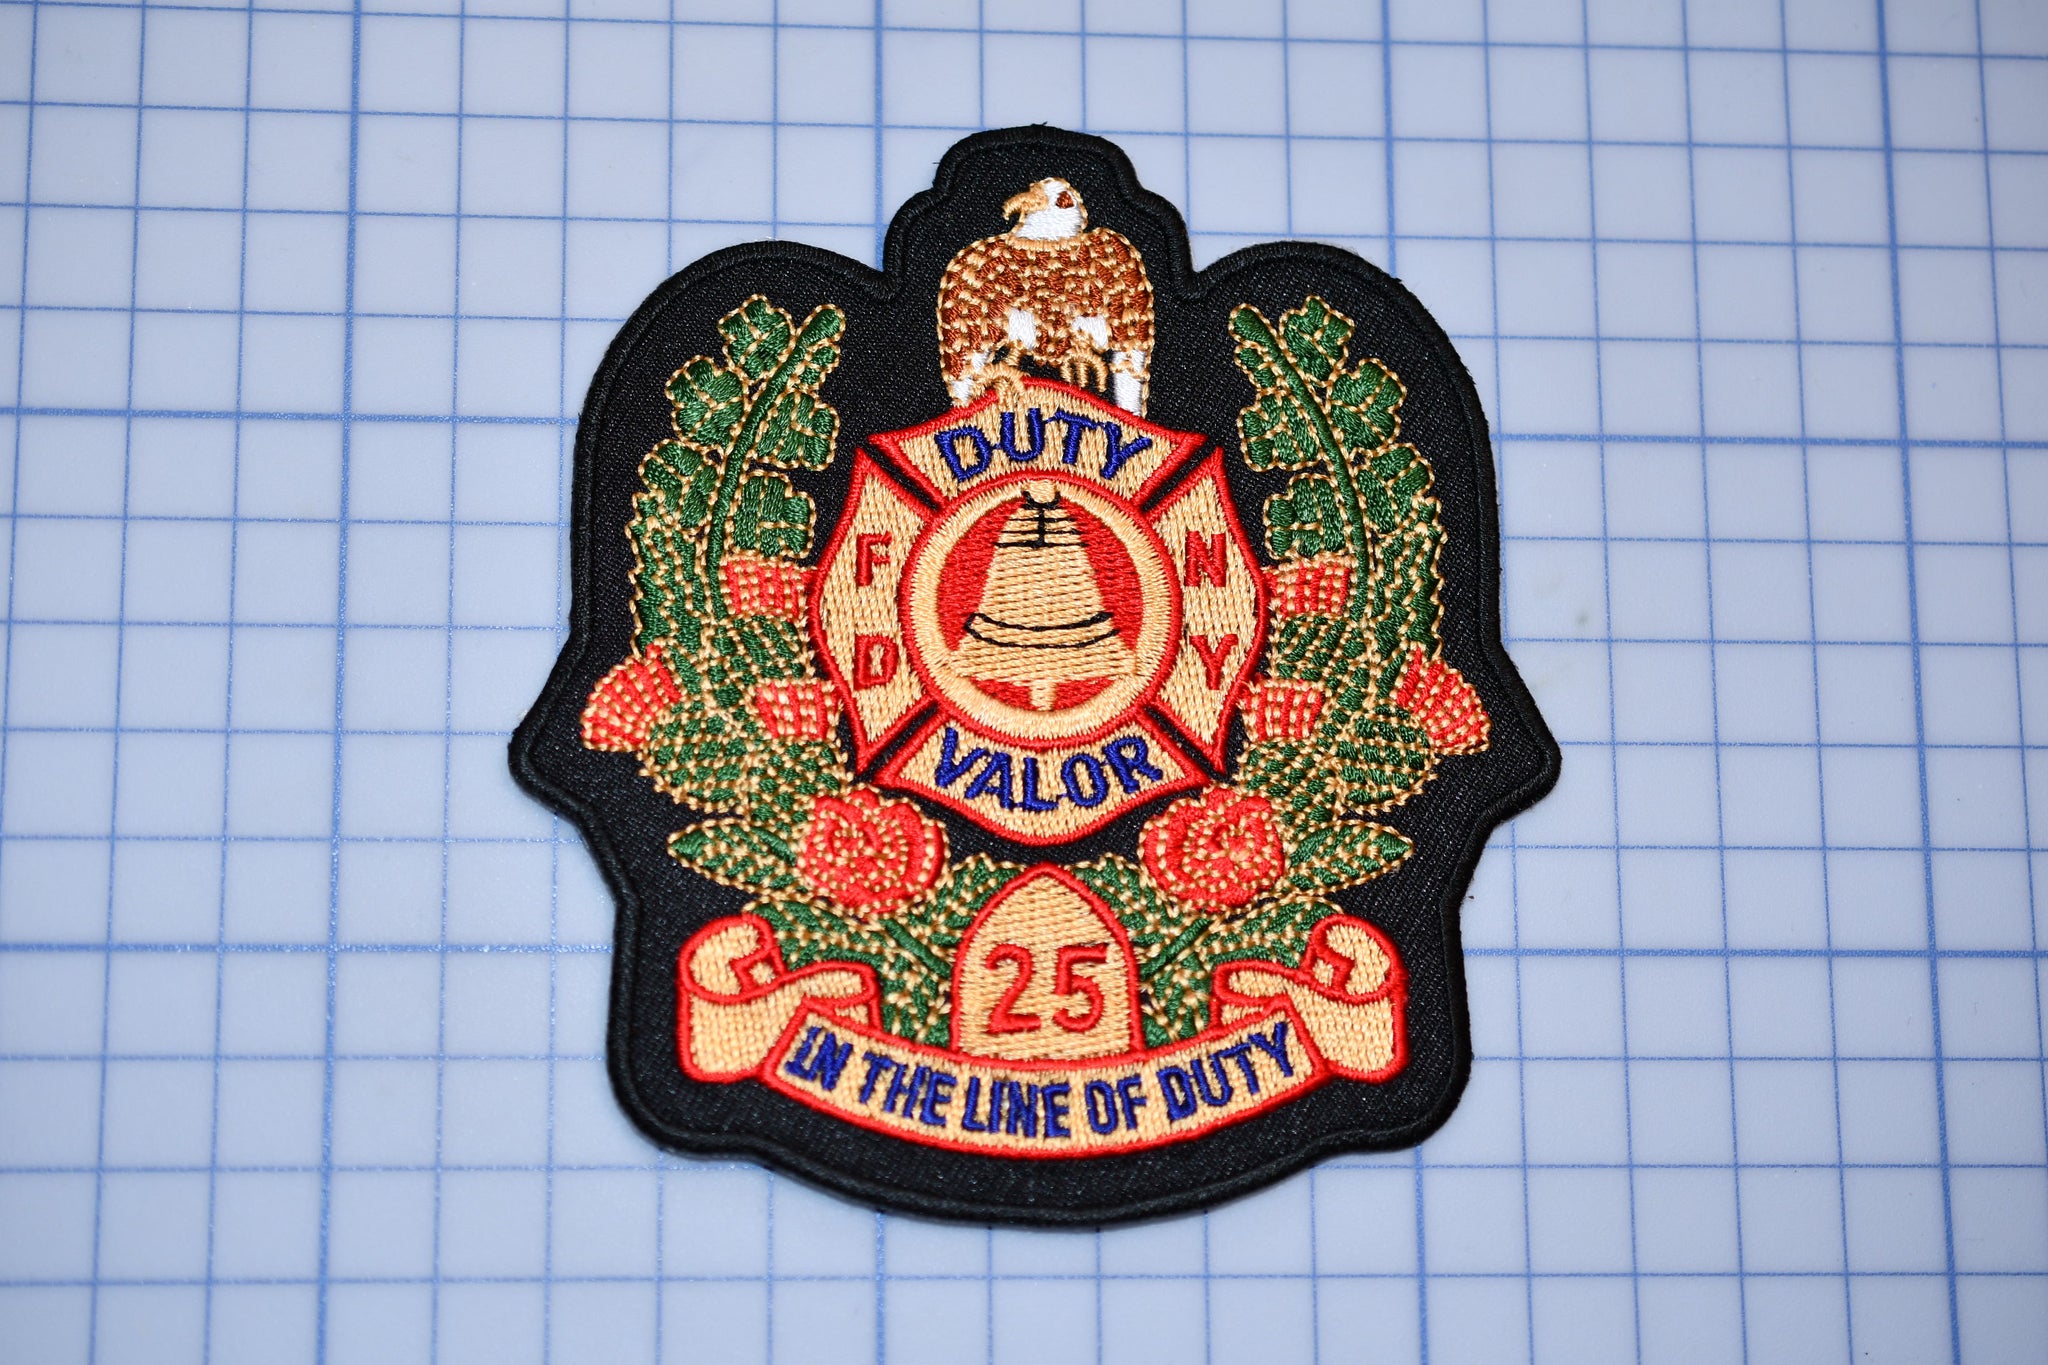 FDNY "In The Line of Duty" Patch (B11)